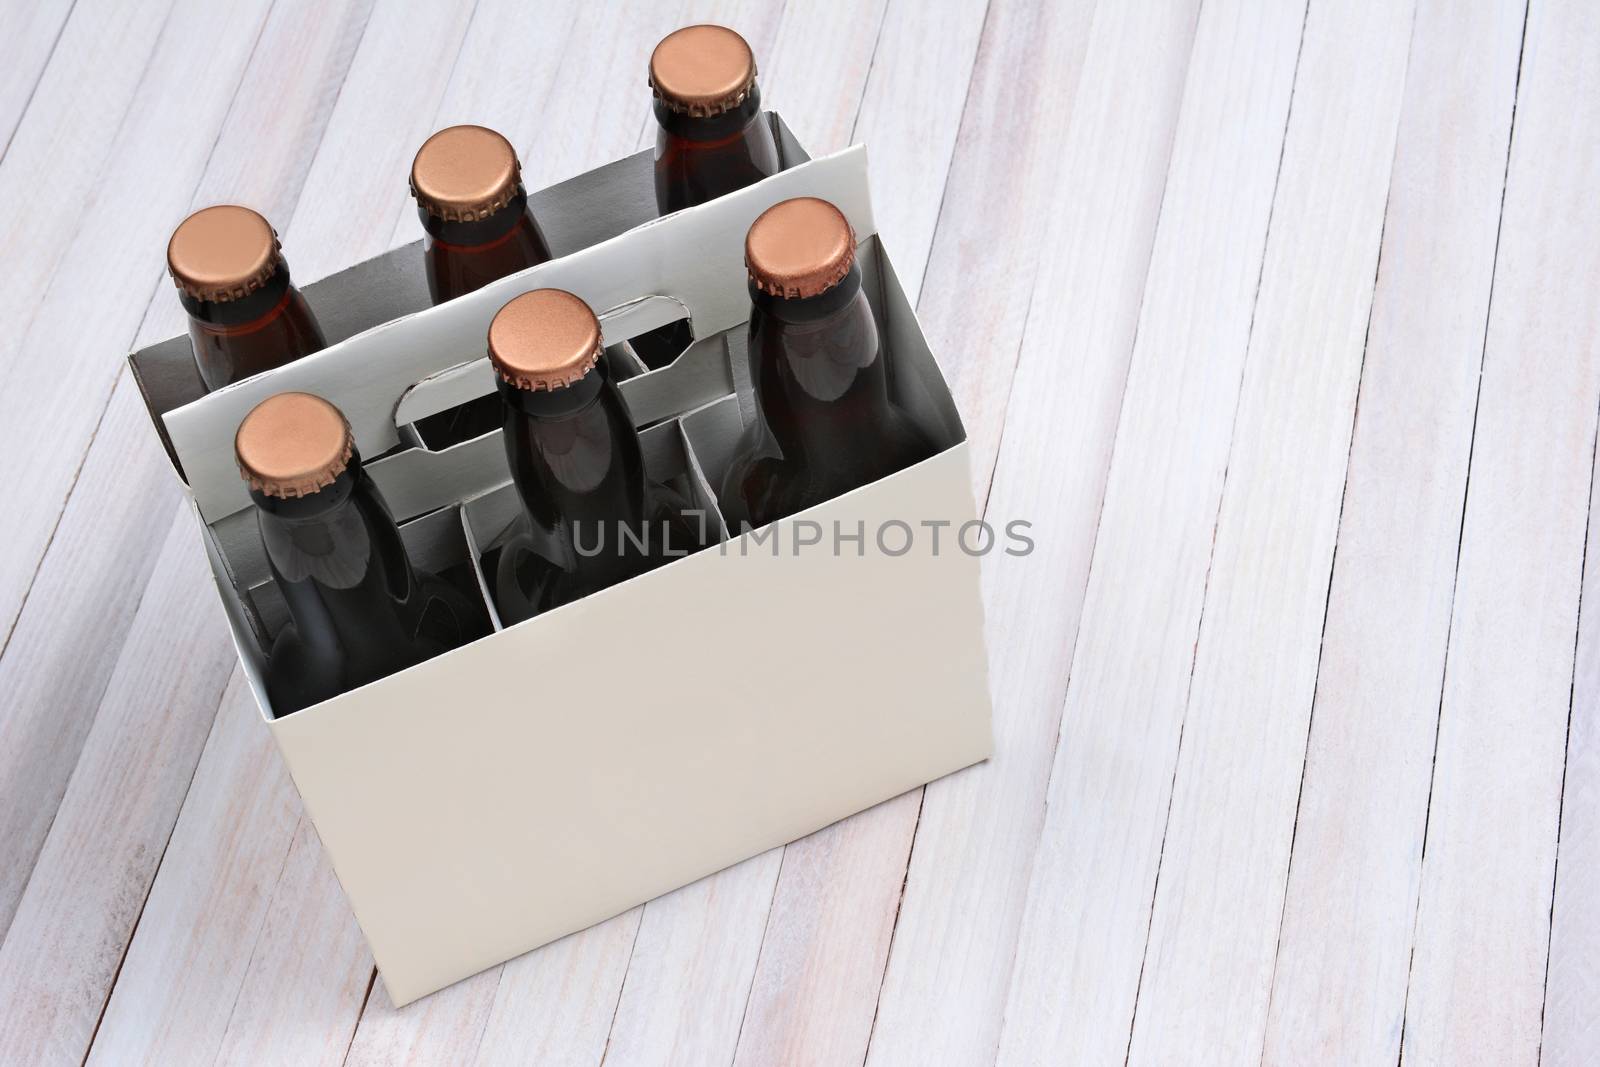 Blank Six Pack on Wood Table by sCukrov